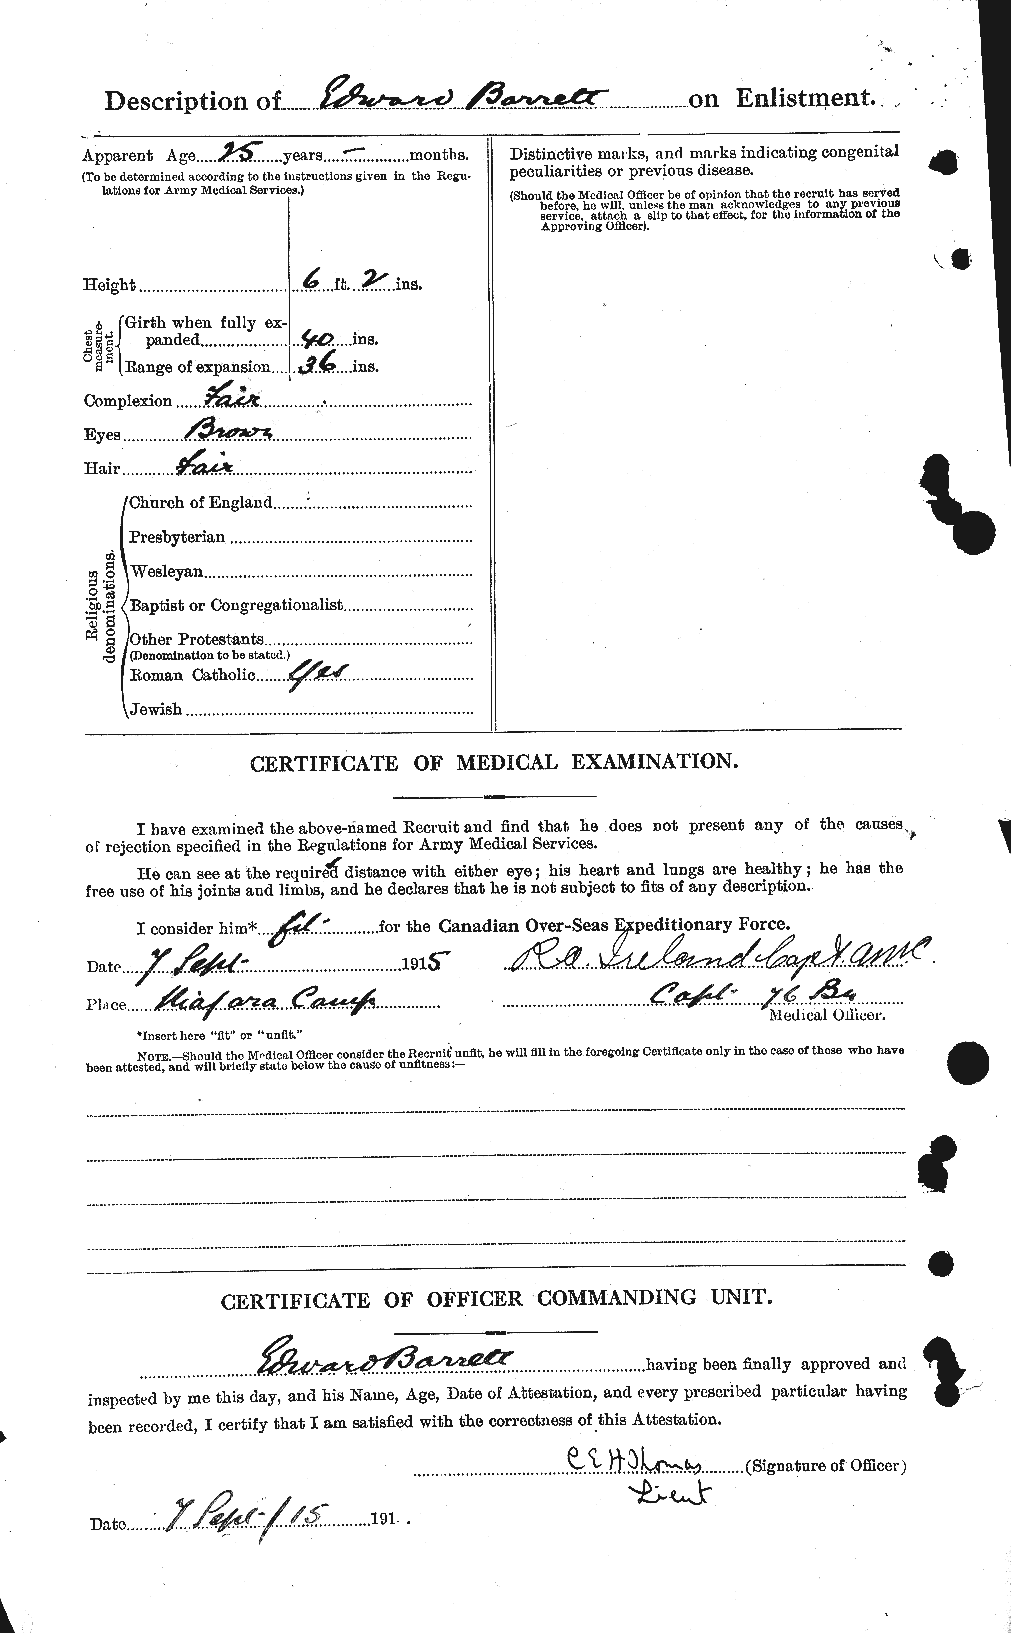 Personnel Records of the First World War - CEF 220359b